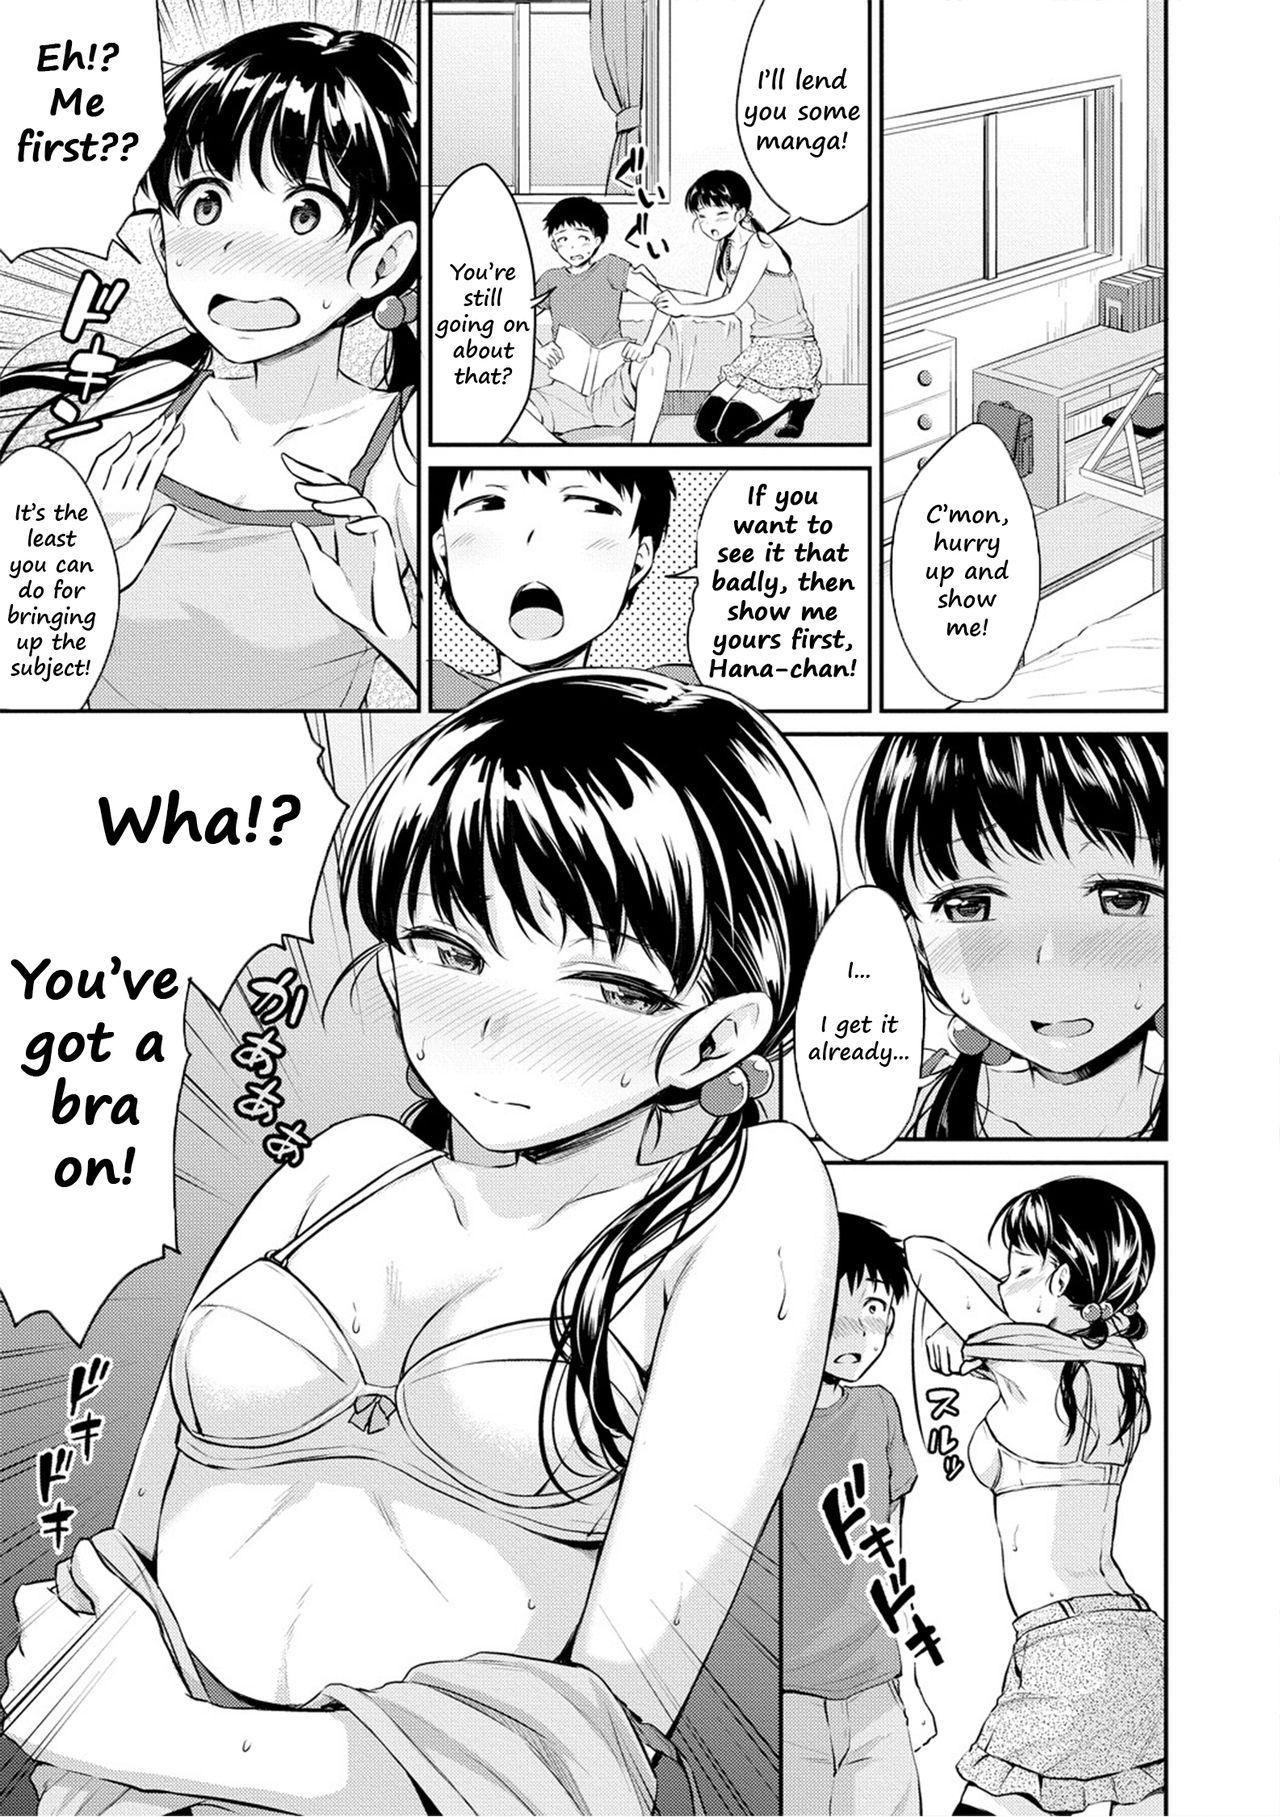 Buttplug Kyou, Atashinchi Shuugoune! | Let's Meet at my Place Today! Spa - Page 3